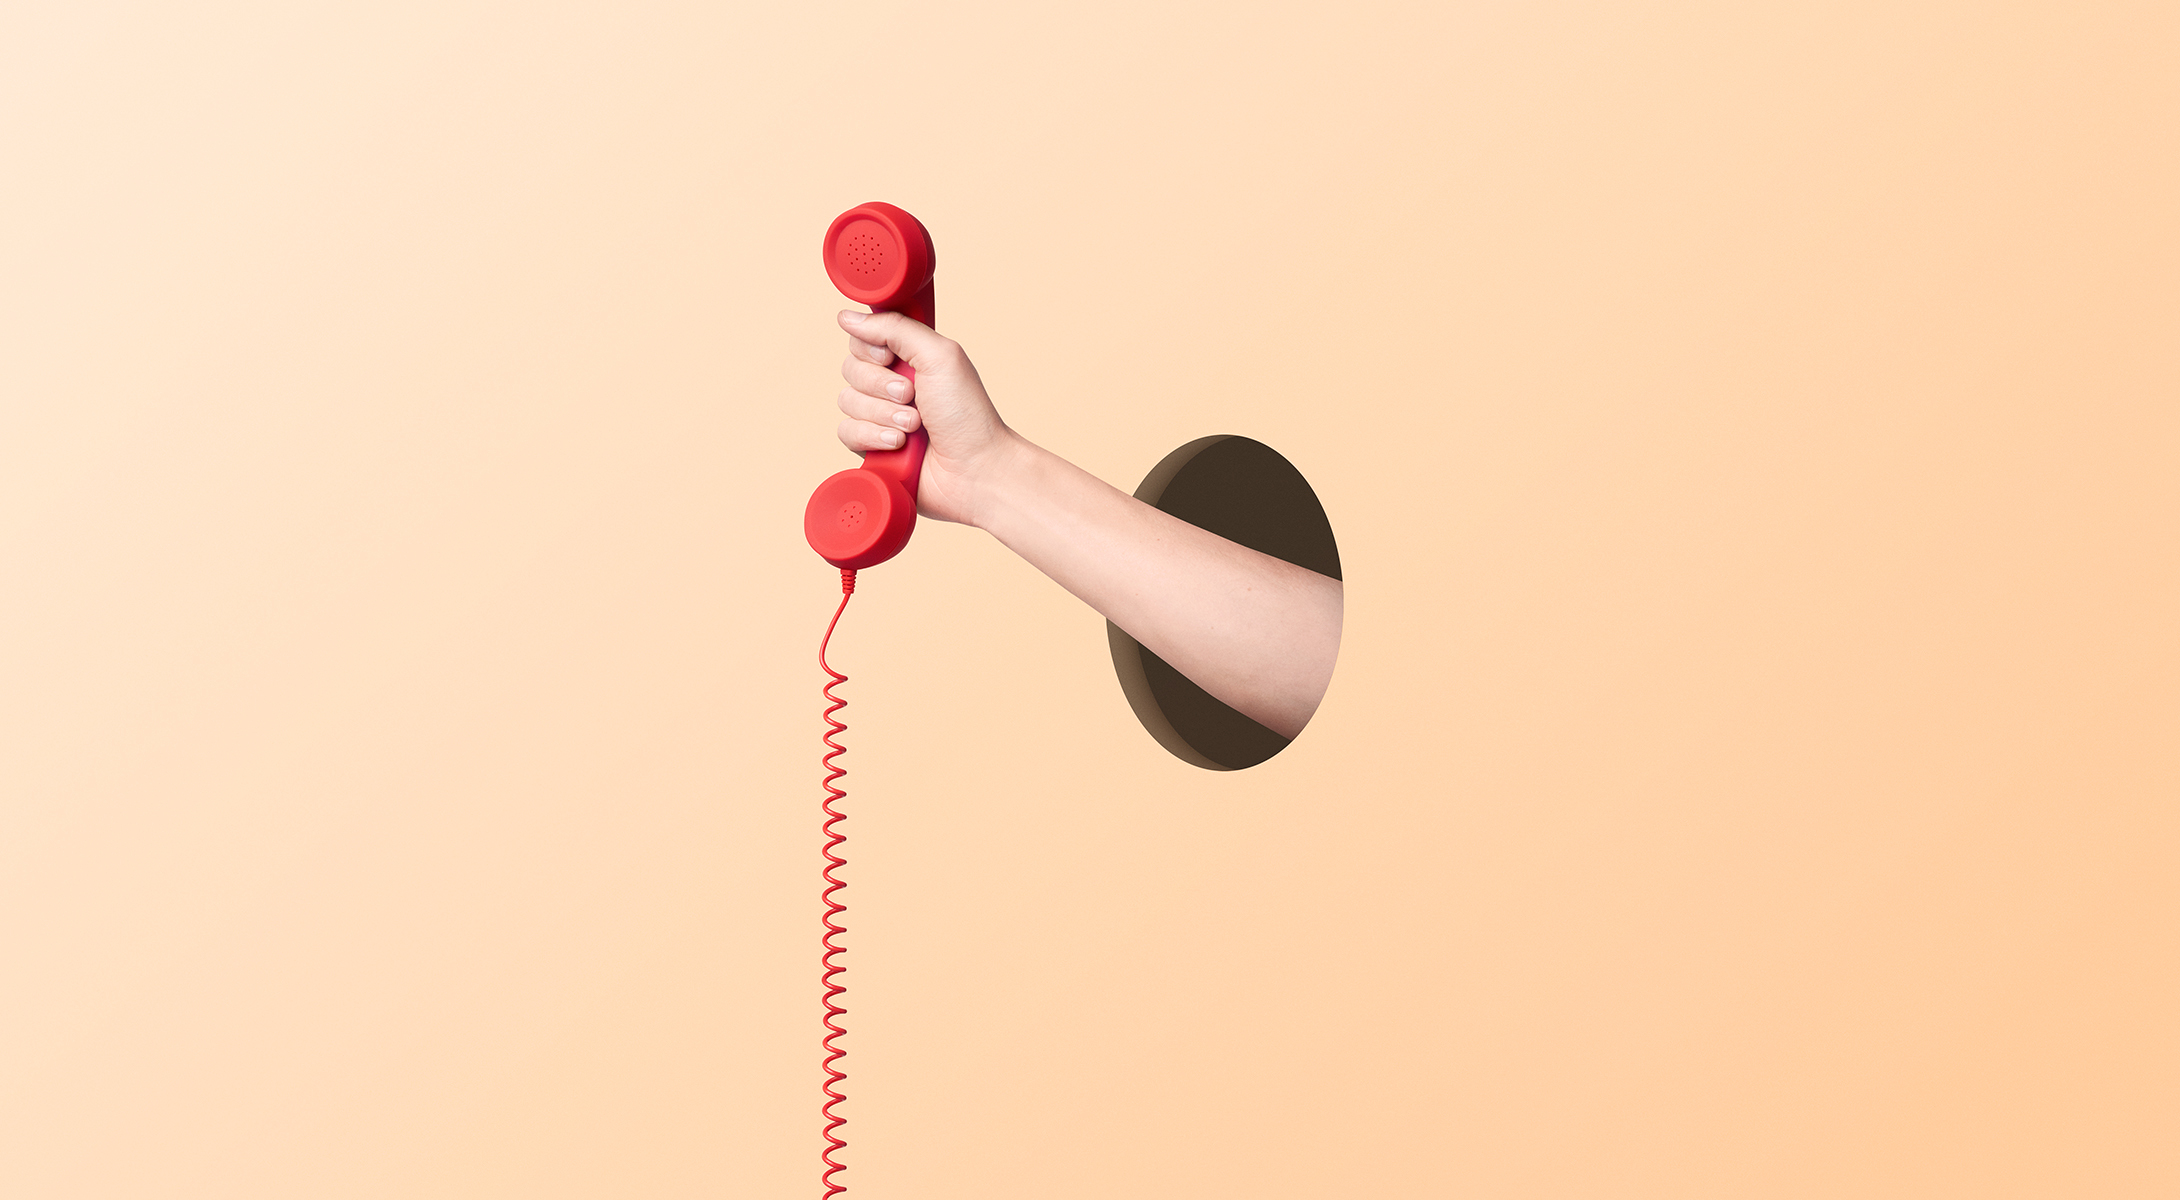 An image of a hand sticking trhough a wall and gripping a red corded phone receiver.